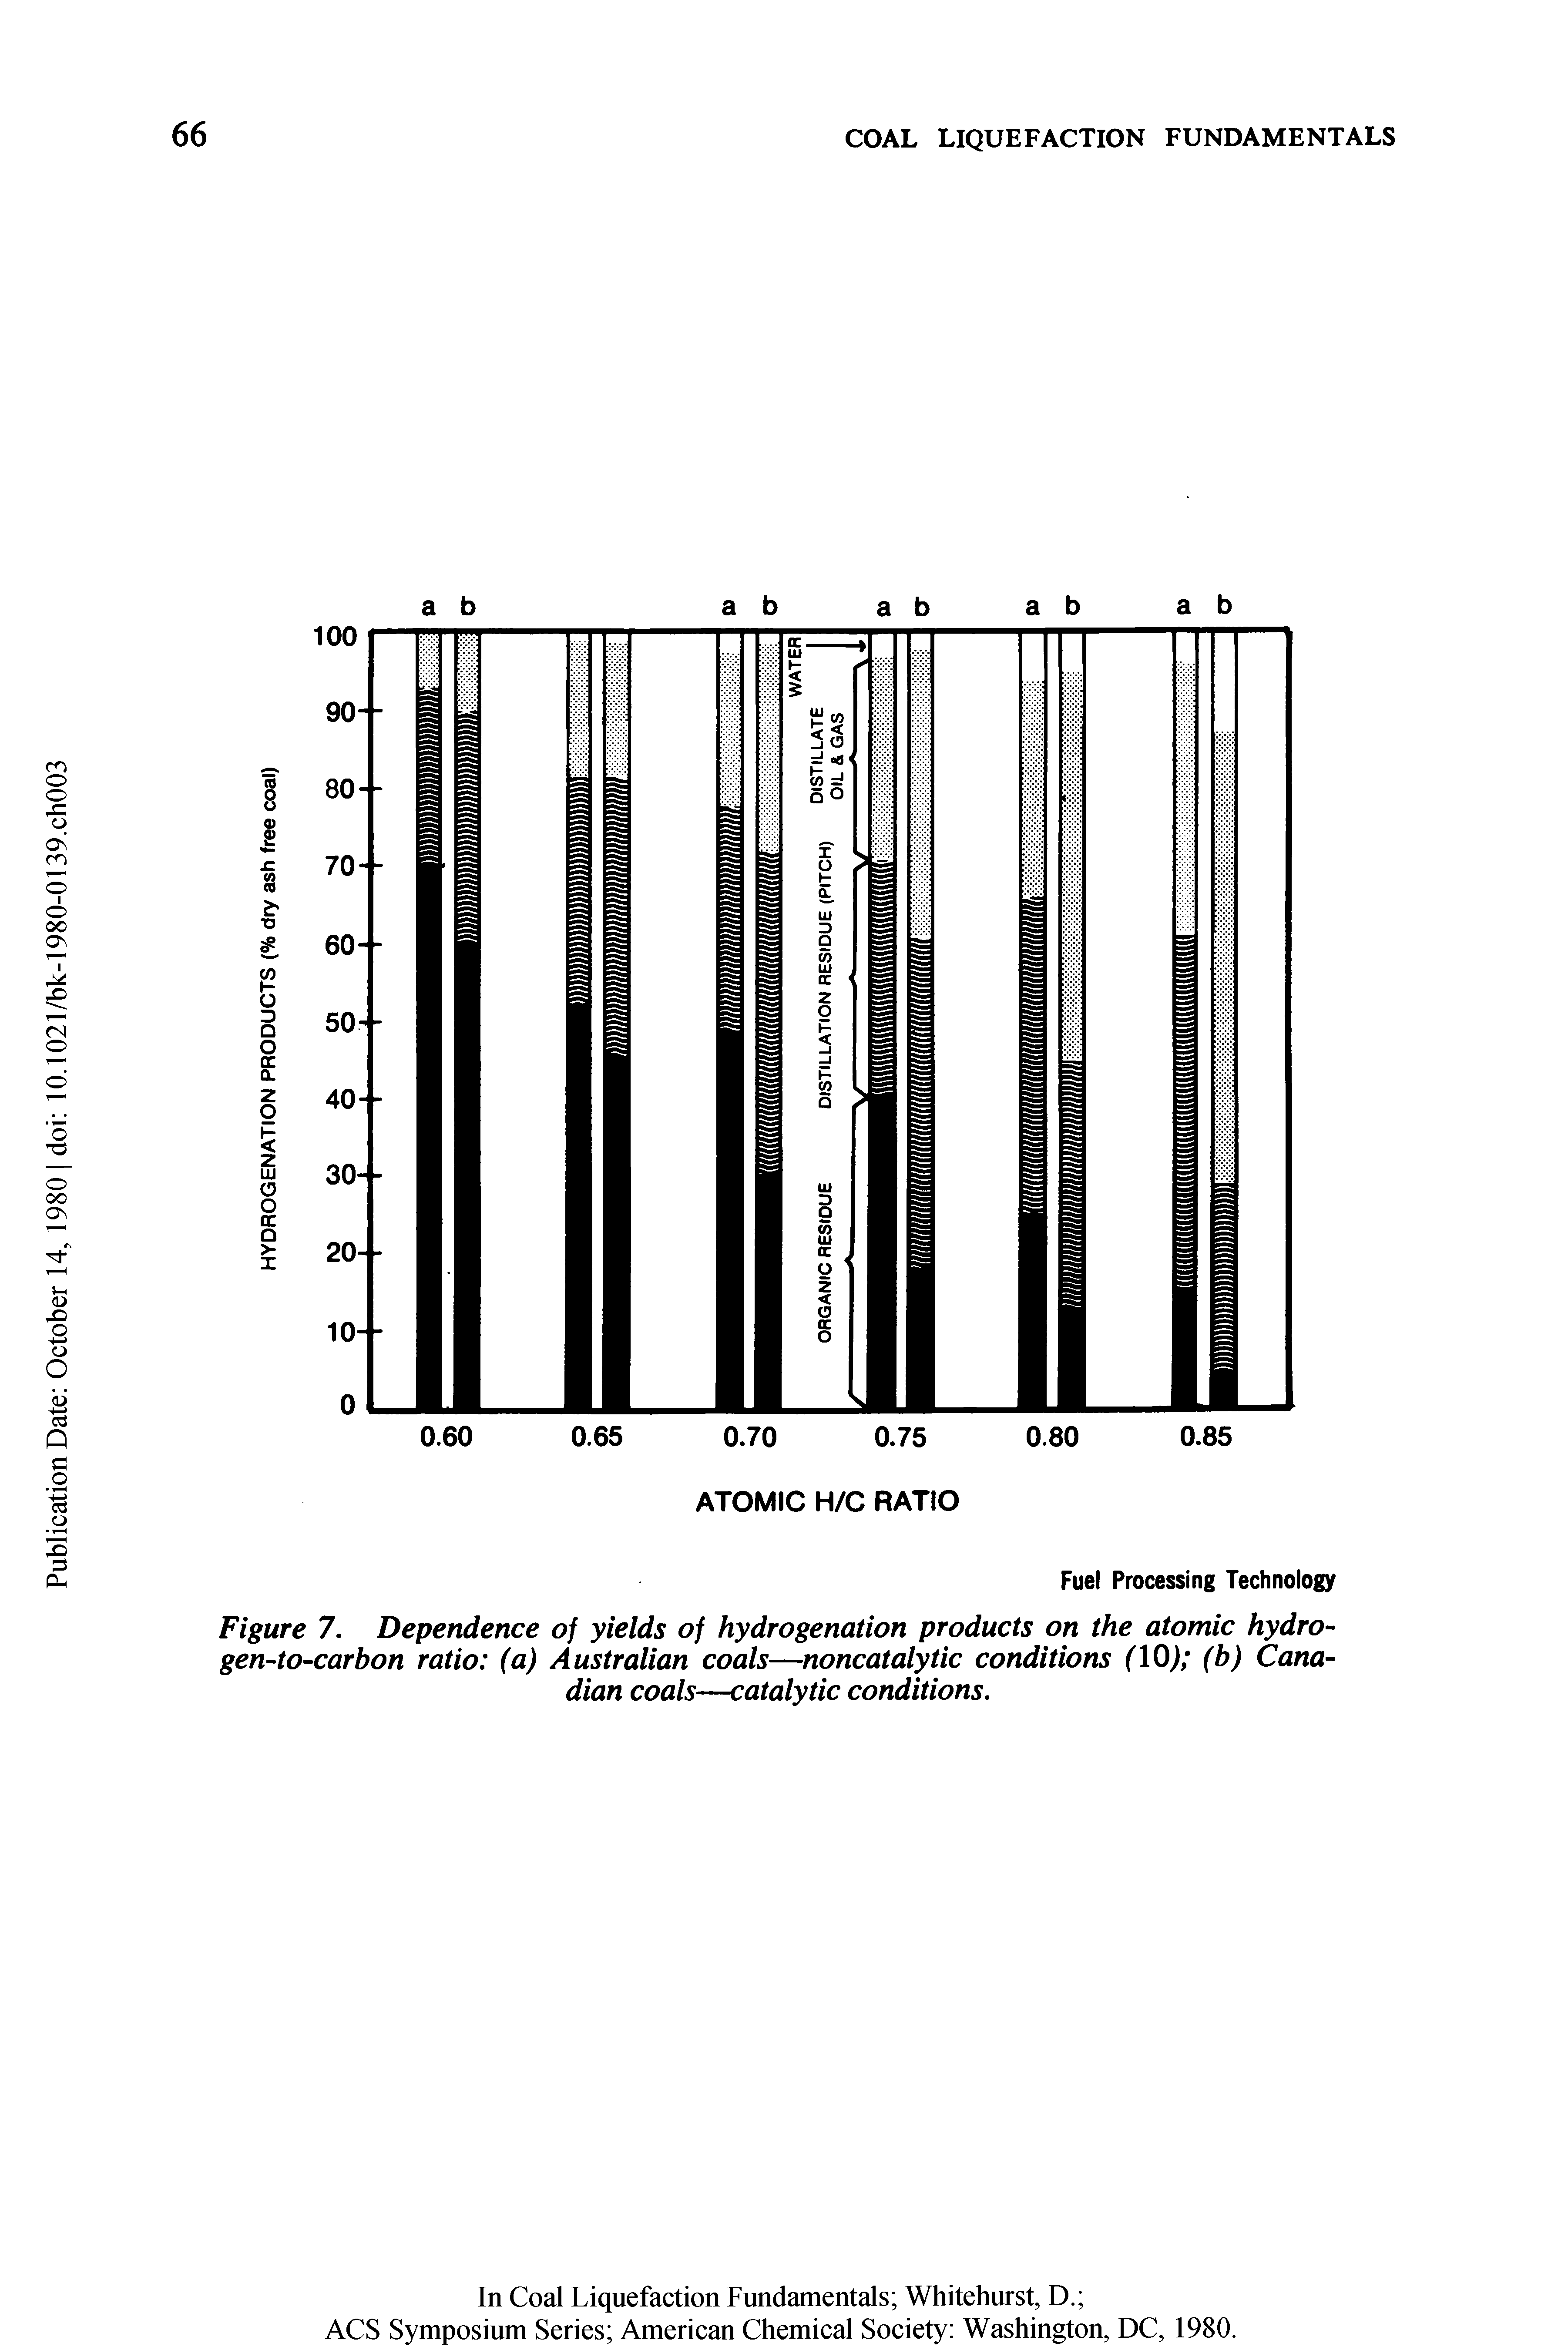 Figure 7. Dependence of yields of hydrogenation products on the atomic hydro-gen-to-carbon ratio (a) Australian coals—noncatalytic conditions (10) (b) Canadian coals—catalytic conditions.